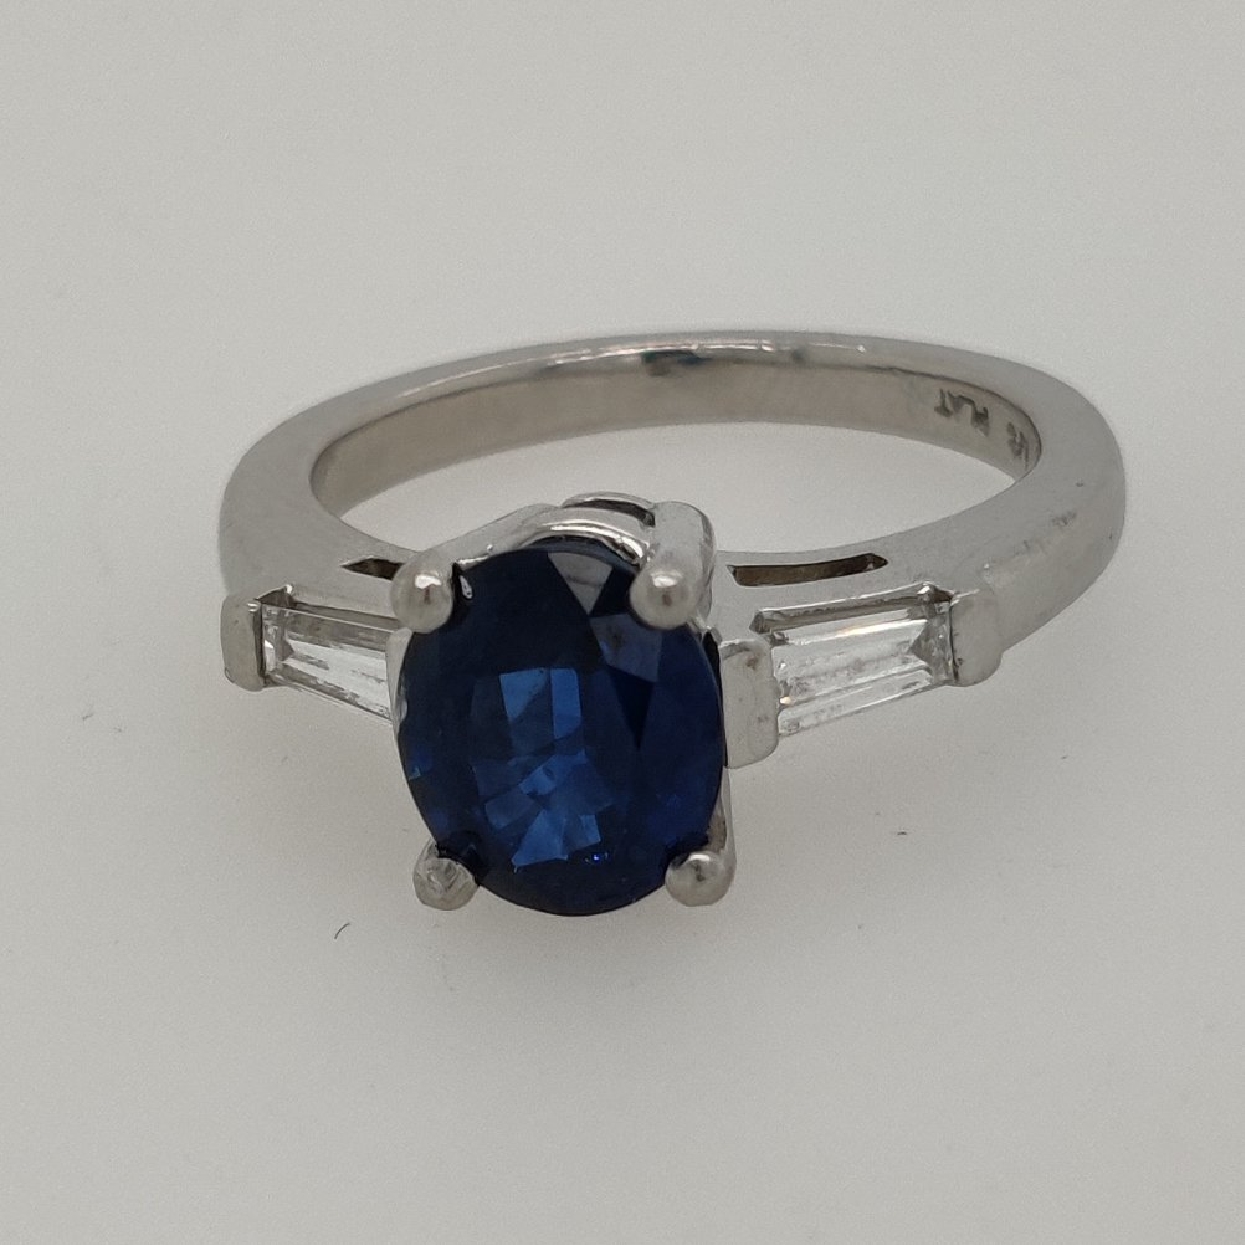 Platinum and Sapphire Ring with 2 Diamond Baguettes; Size 4.5
1.71CT Sapphire